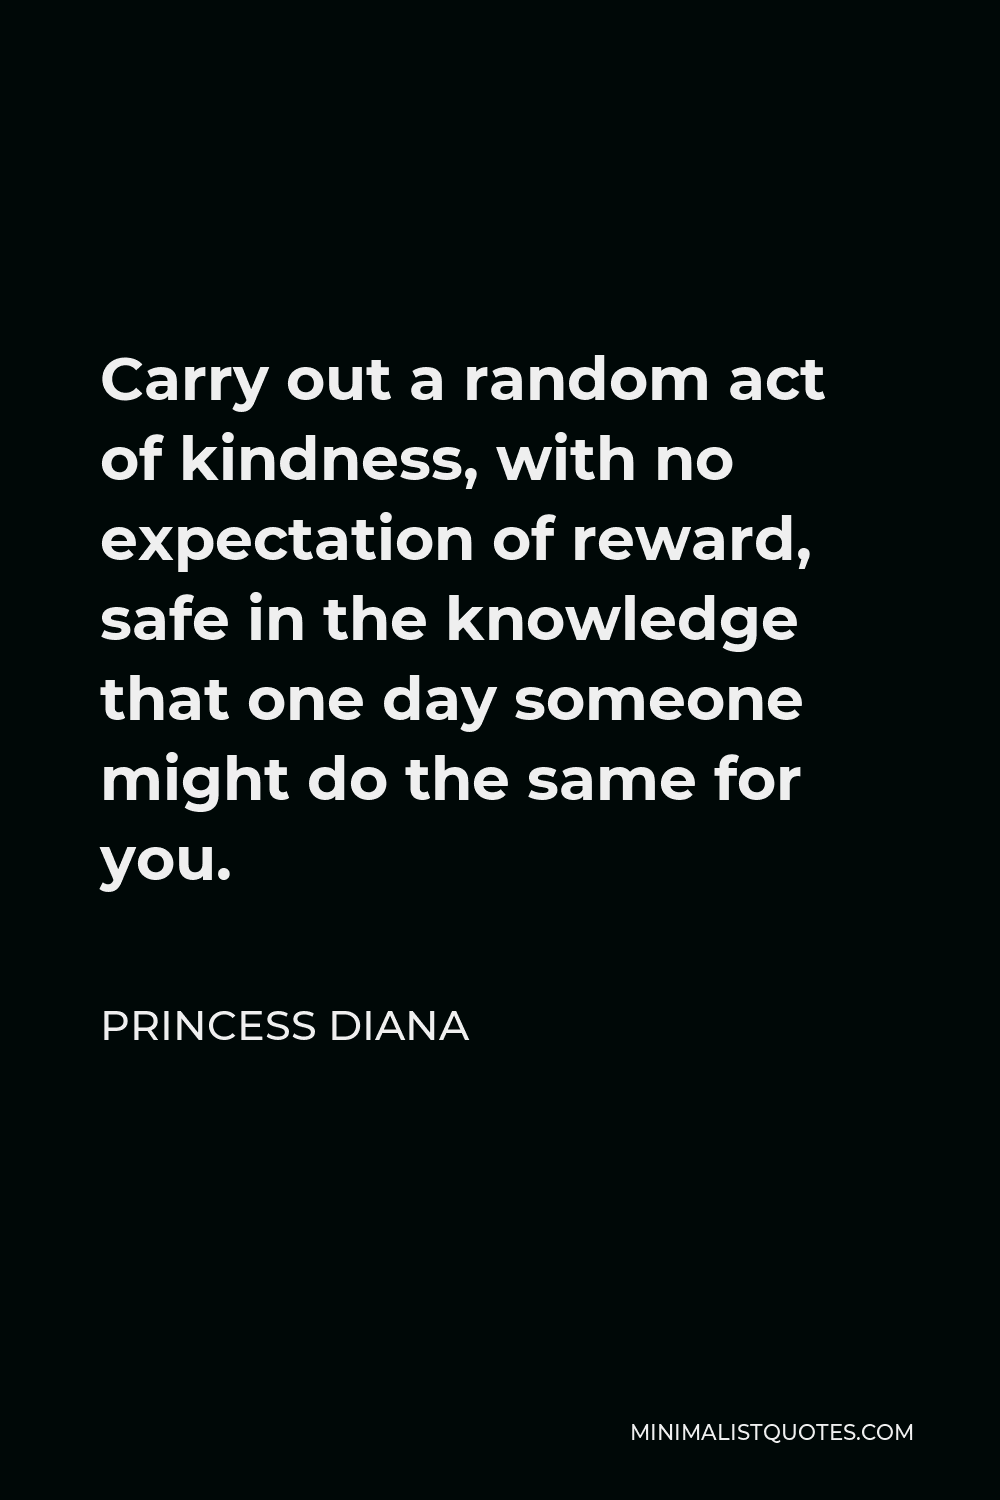 Princess Diana Quote - Carry out a random act of kindness, with no expectation of reward, safe in the knowledge that one day someone might do the same for you.